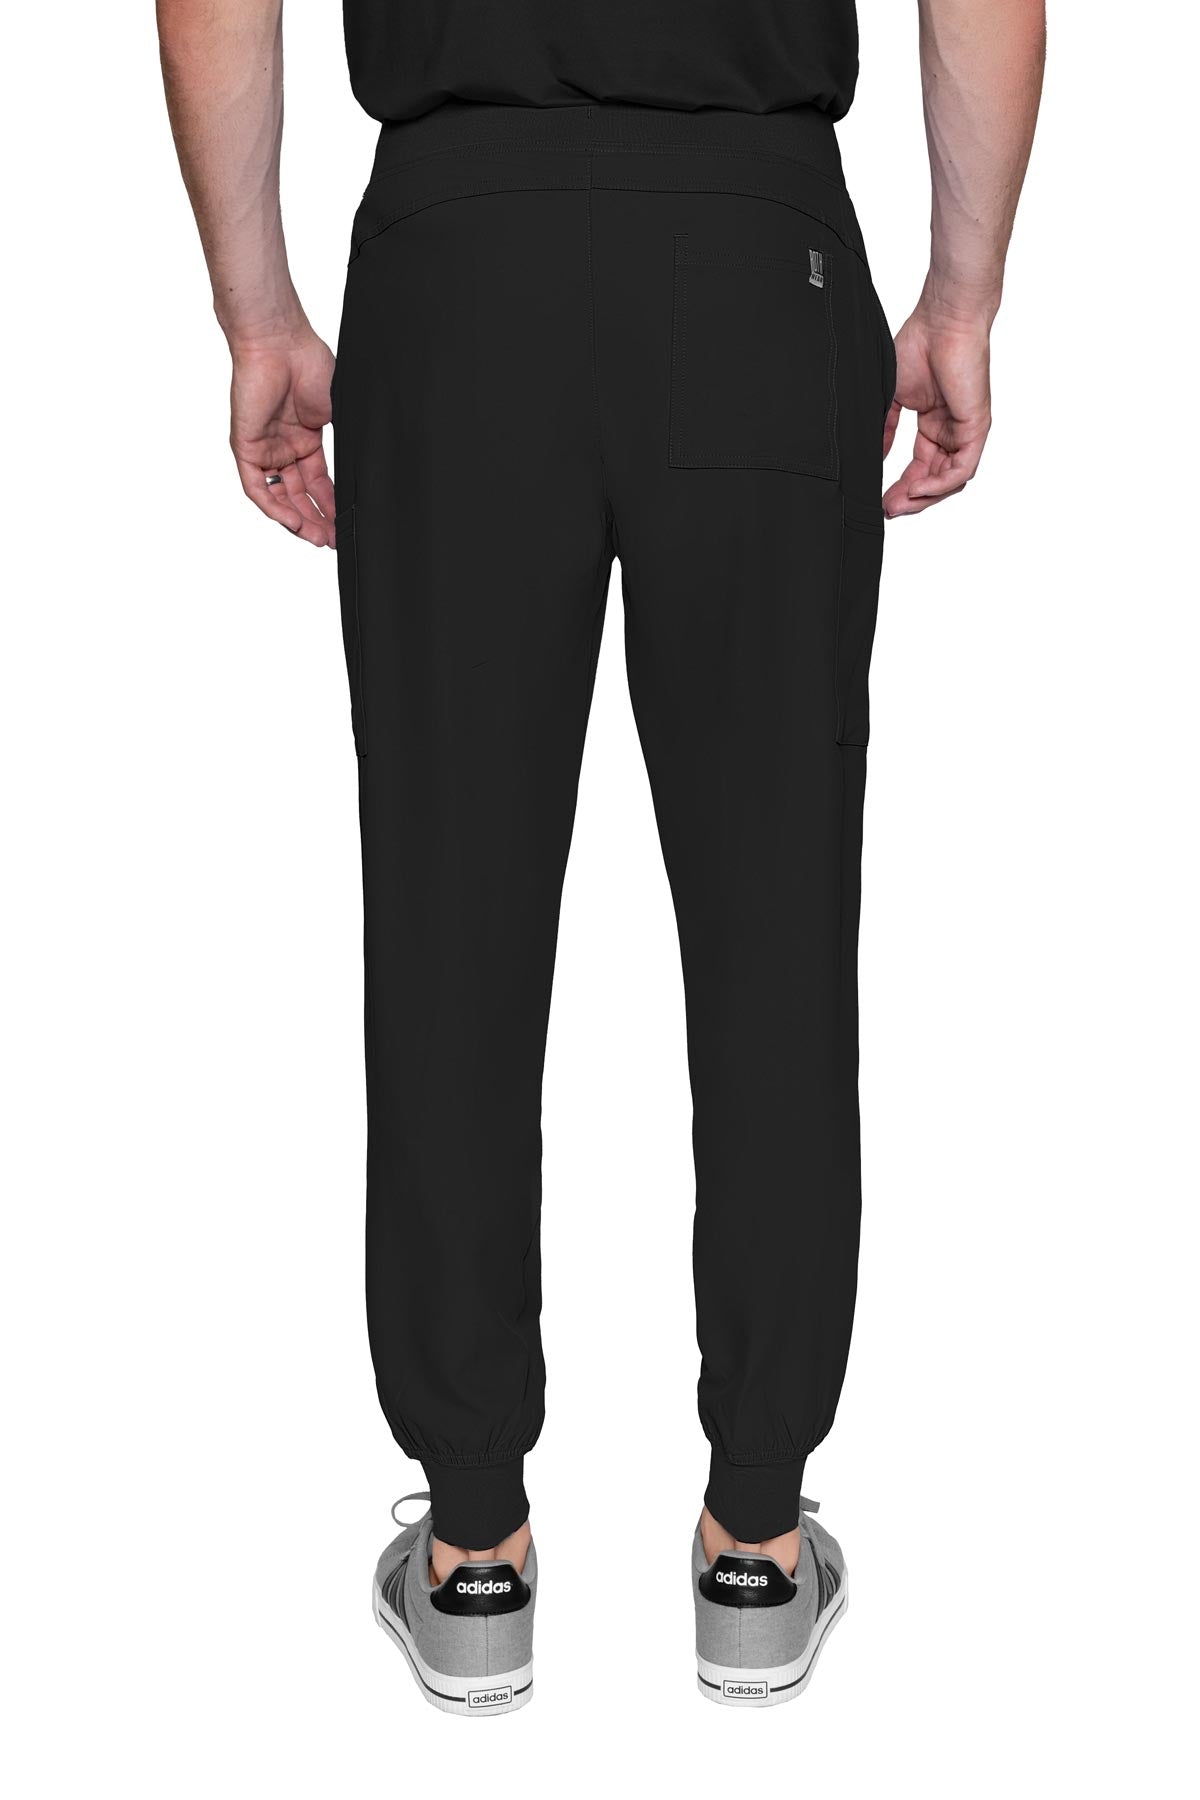 Med Couture 2711 Insight Women's Jogger Pant - TALL – Valley West Uniforms